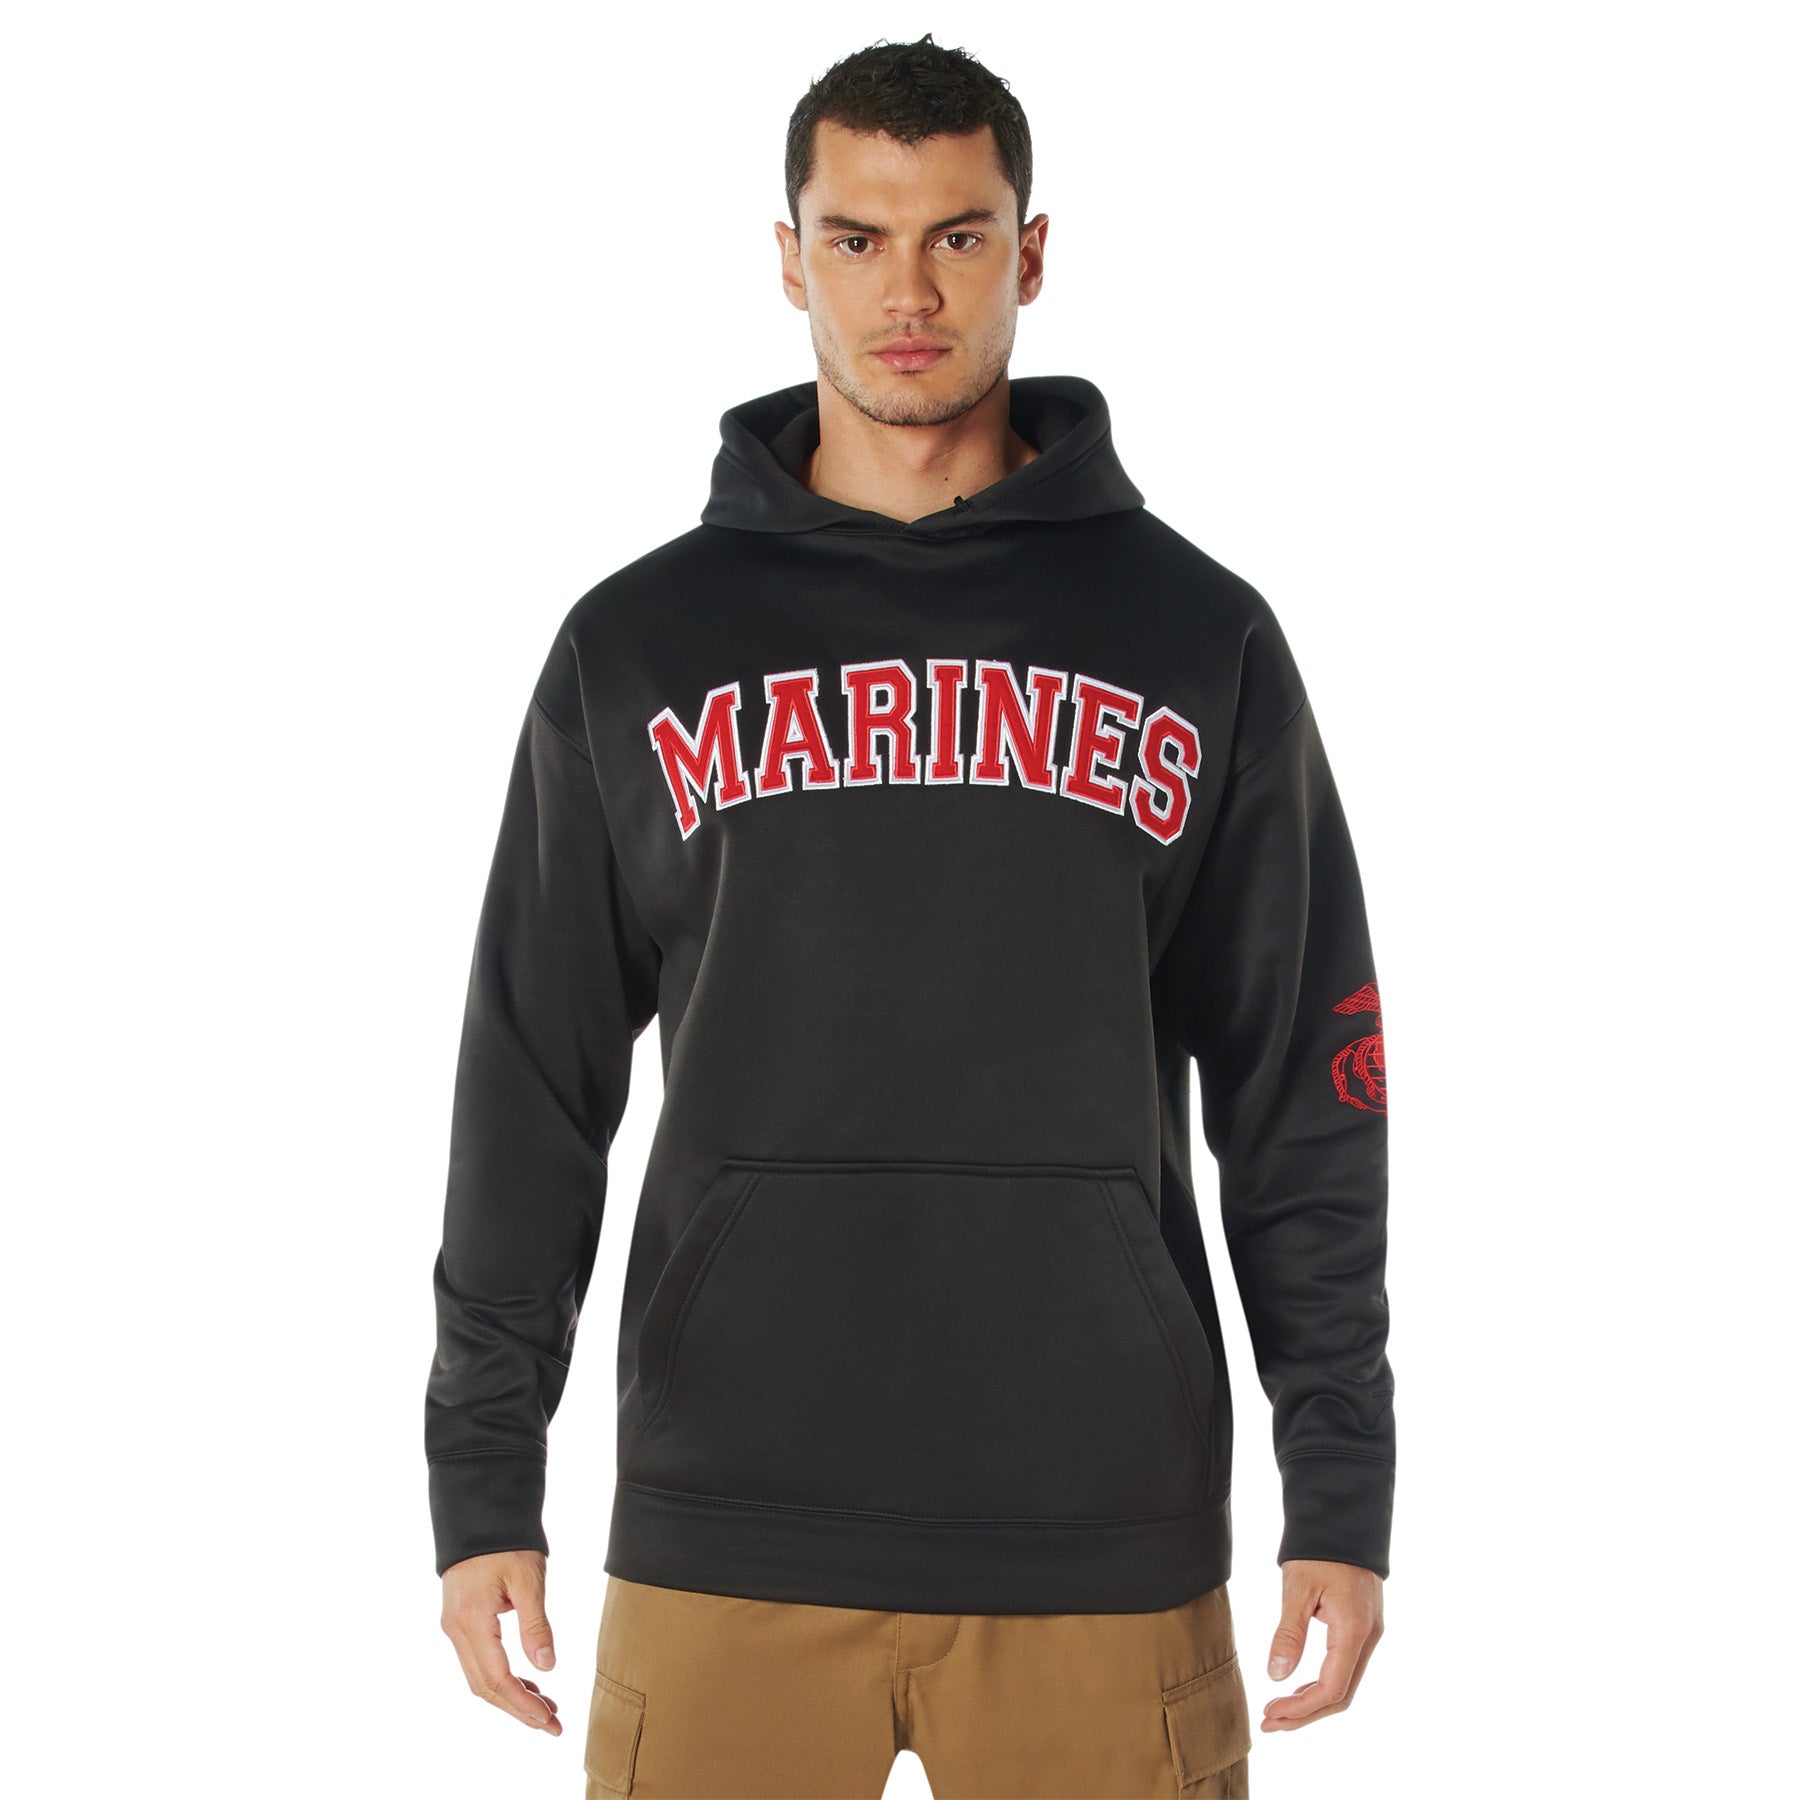 Poly Military Marines Embroidered Hooded Sweatshirts Black